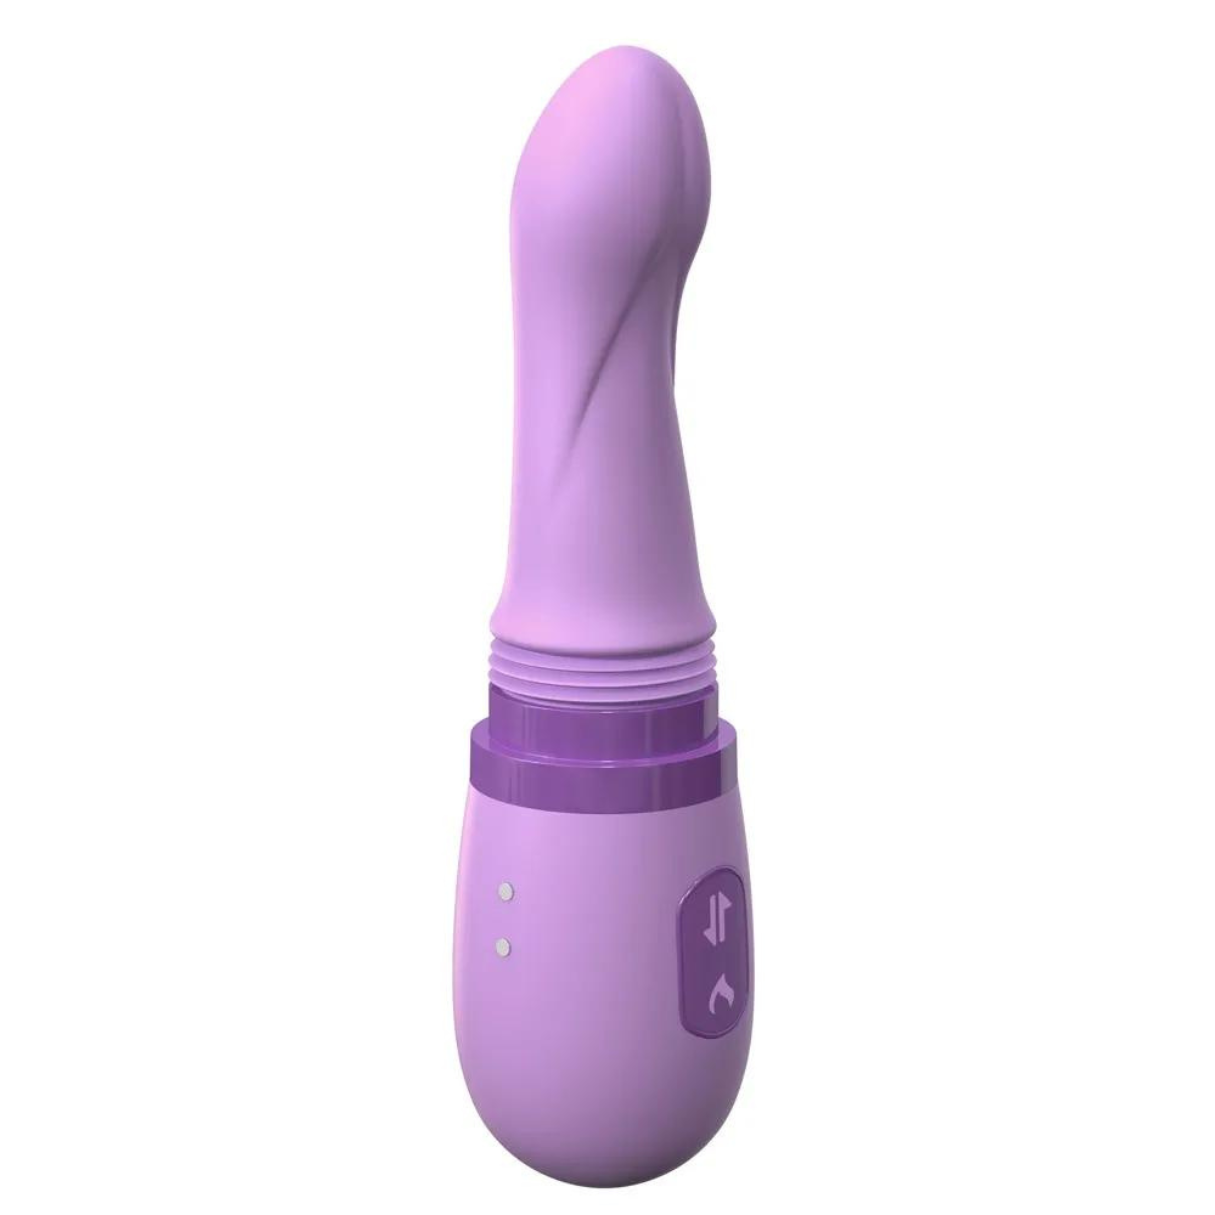 FANTASY FOR Personal Her Sex Machine Vibrator HER